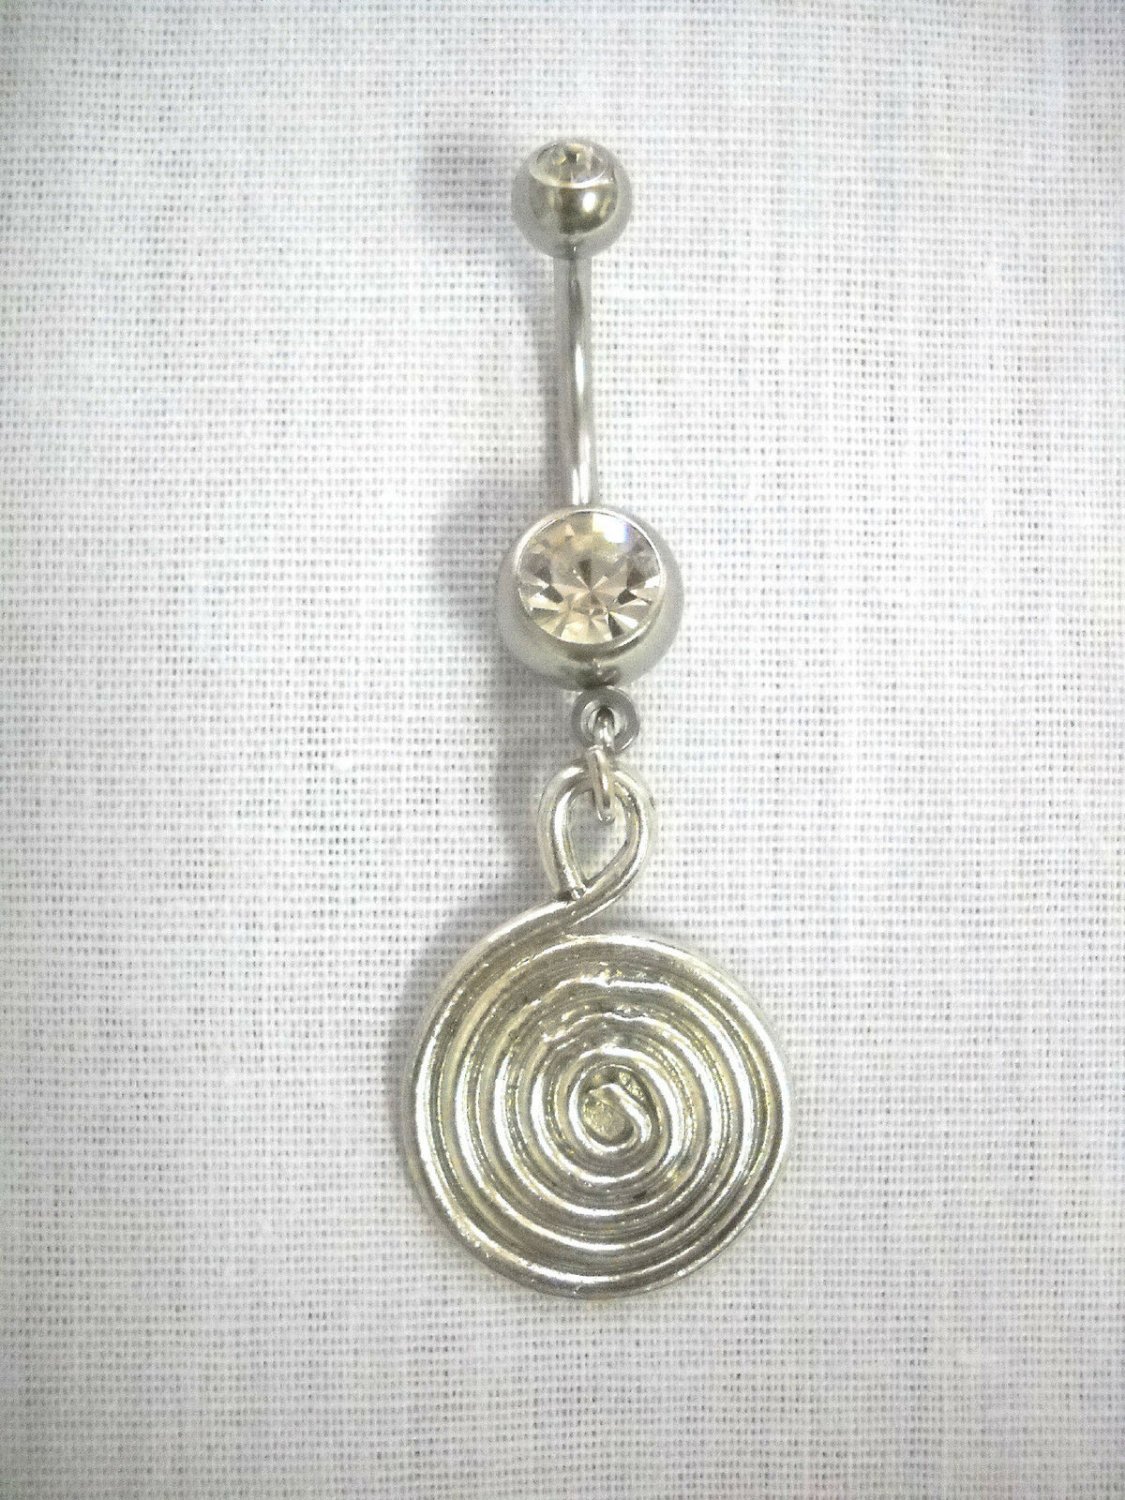 PEWTER GALAXY OUTER SPACE INFINITY SPIRAL CHARM 14g CZ BELLY RING BARBELL